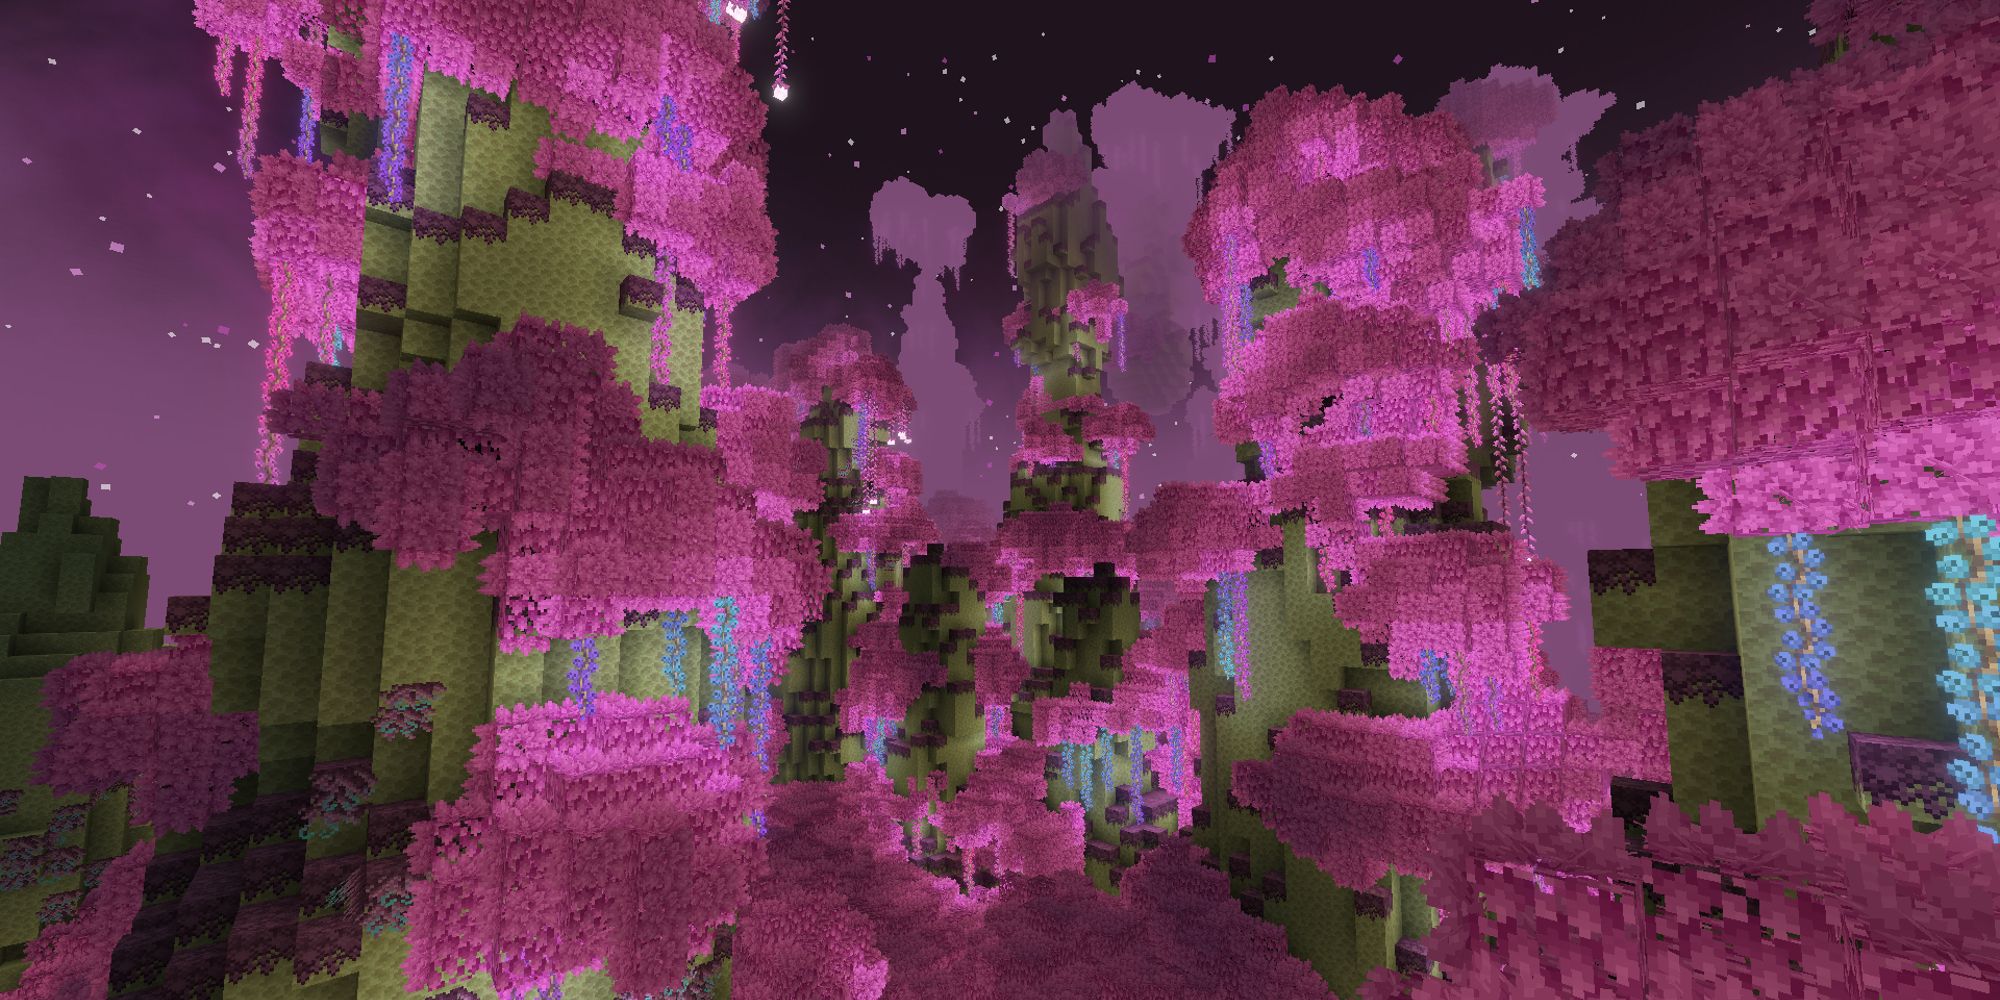 Minecraft End Dimension With Massive Pink Trees And Long Overgrown Pink Vines